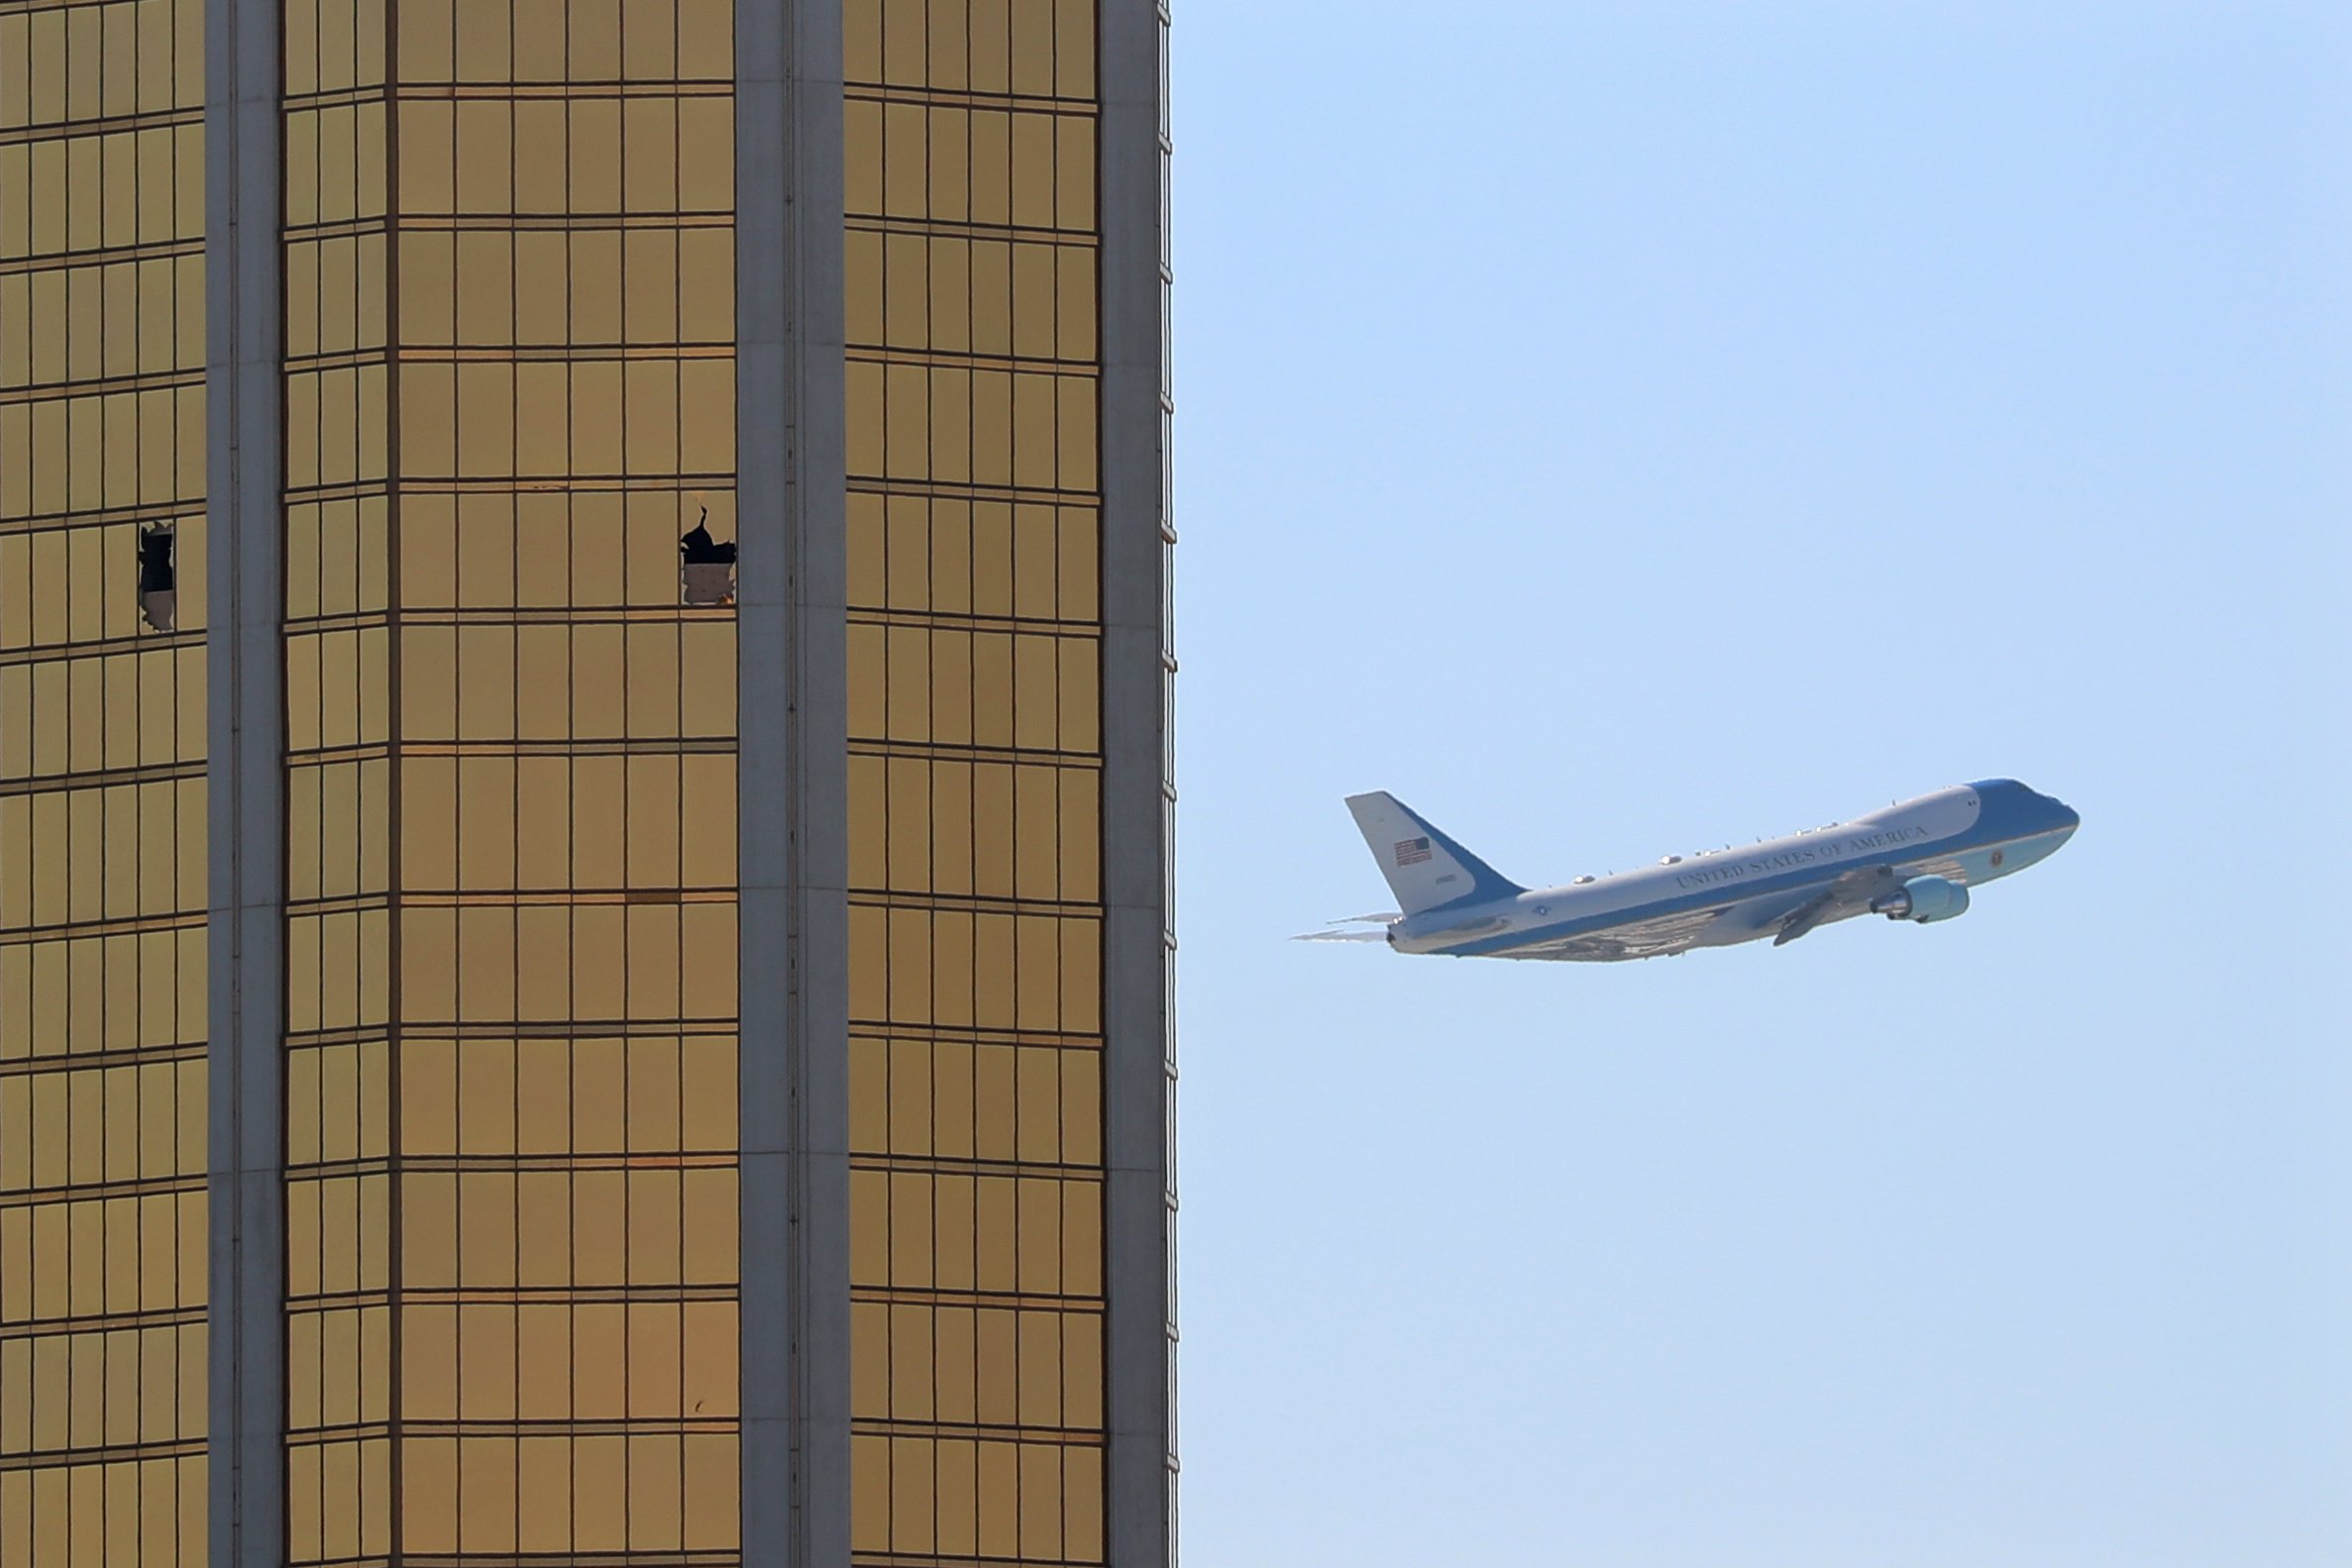 Air Force One departs Las Vegas on Wednesday, flying past the broken windows on the Mandalay Bay Resort and Casino. (Mike Blake/Reuters)